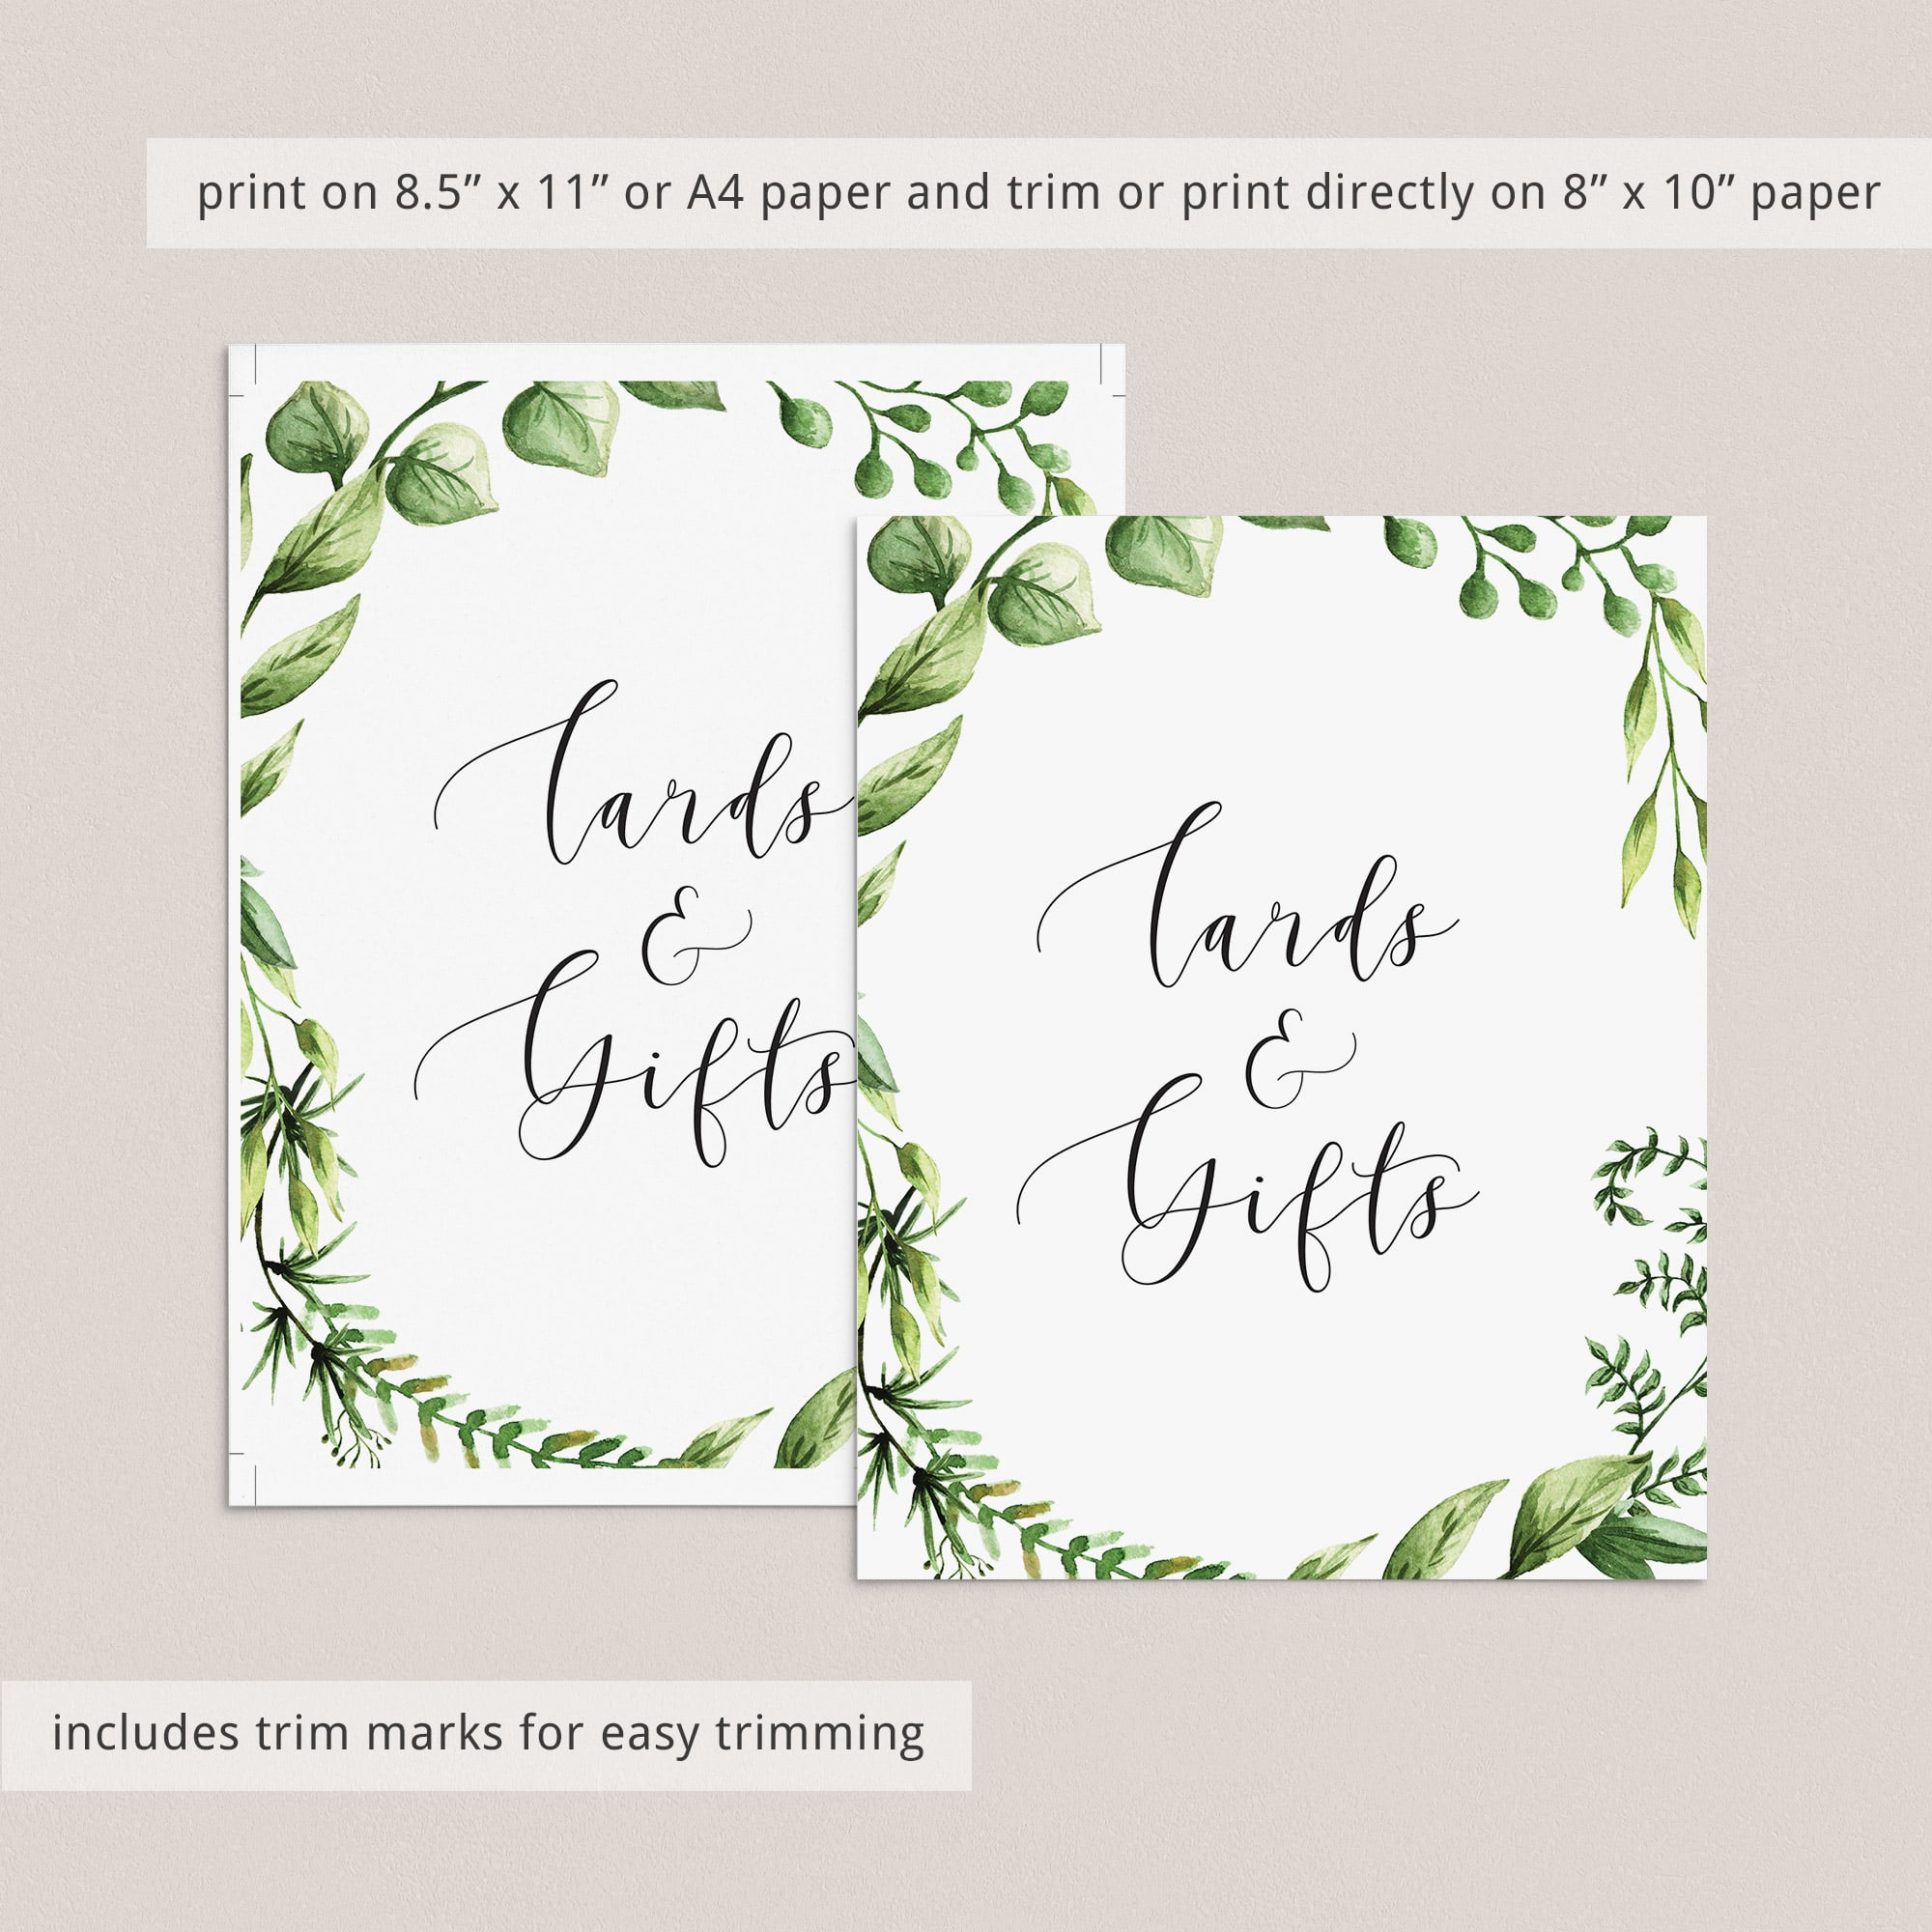 Instant download files for party gift table sign with green leaves by LittleSizzle